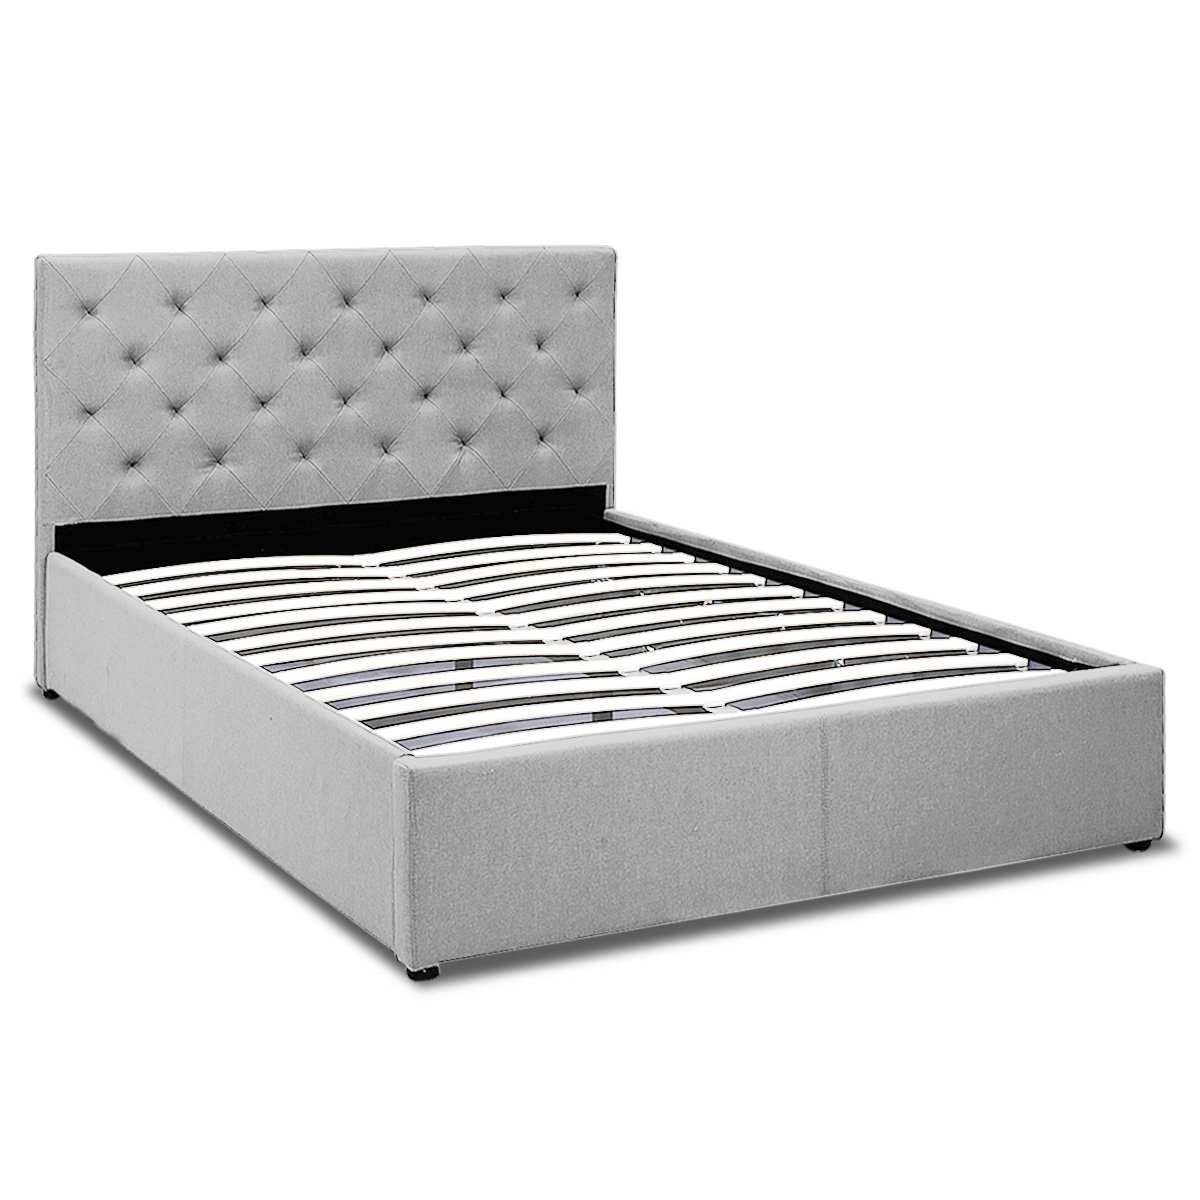 Queen Fabric Gas Lift Bed Frame with Headboard - Grey 1